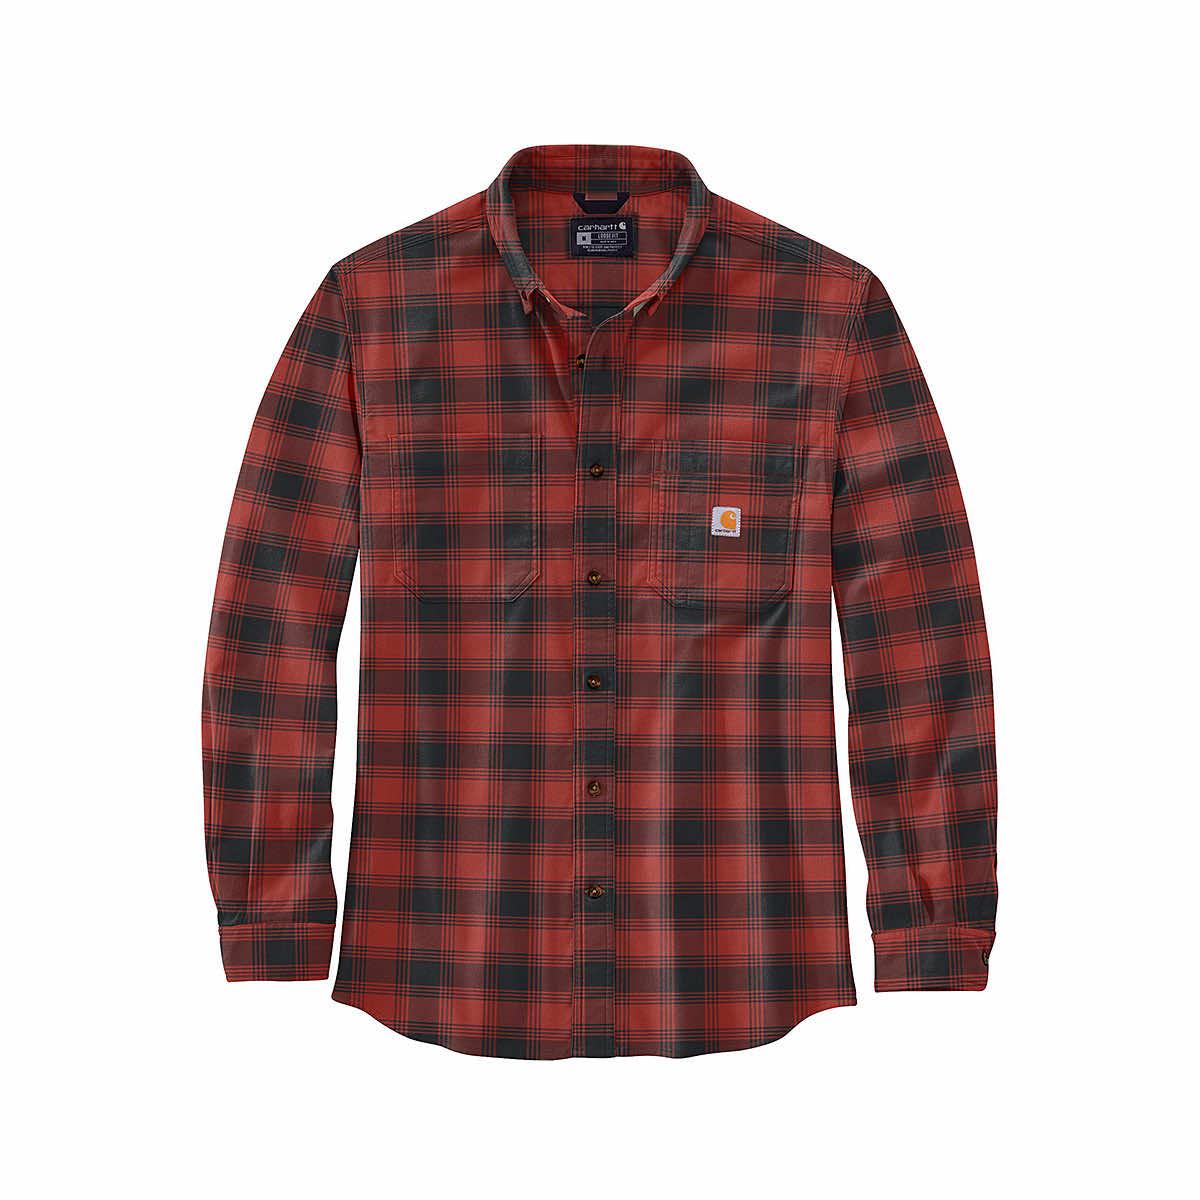  Men's Rugged Flex Relaxed Fit Plaid Midweight Flannel Shirt